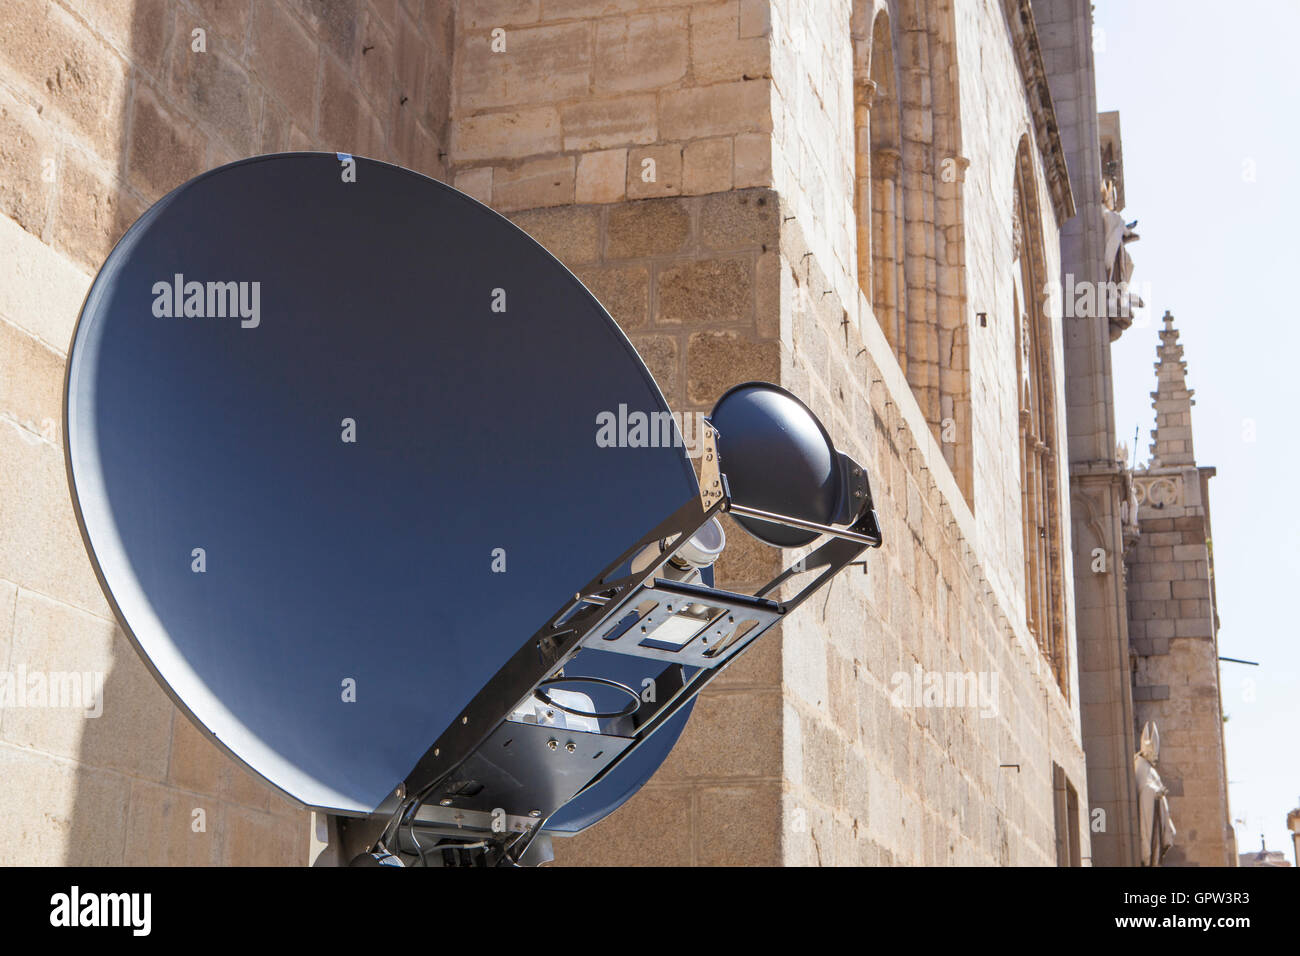 Tv news antenna truck detail at old town city, Toledo Stock Photo